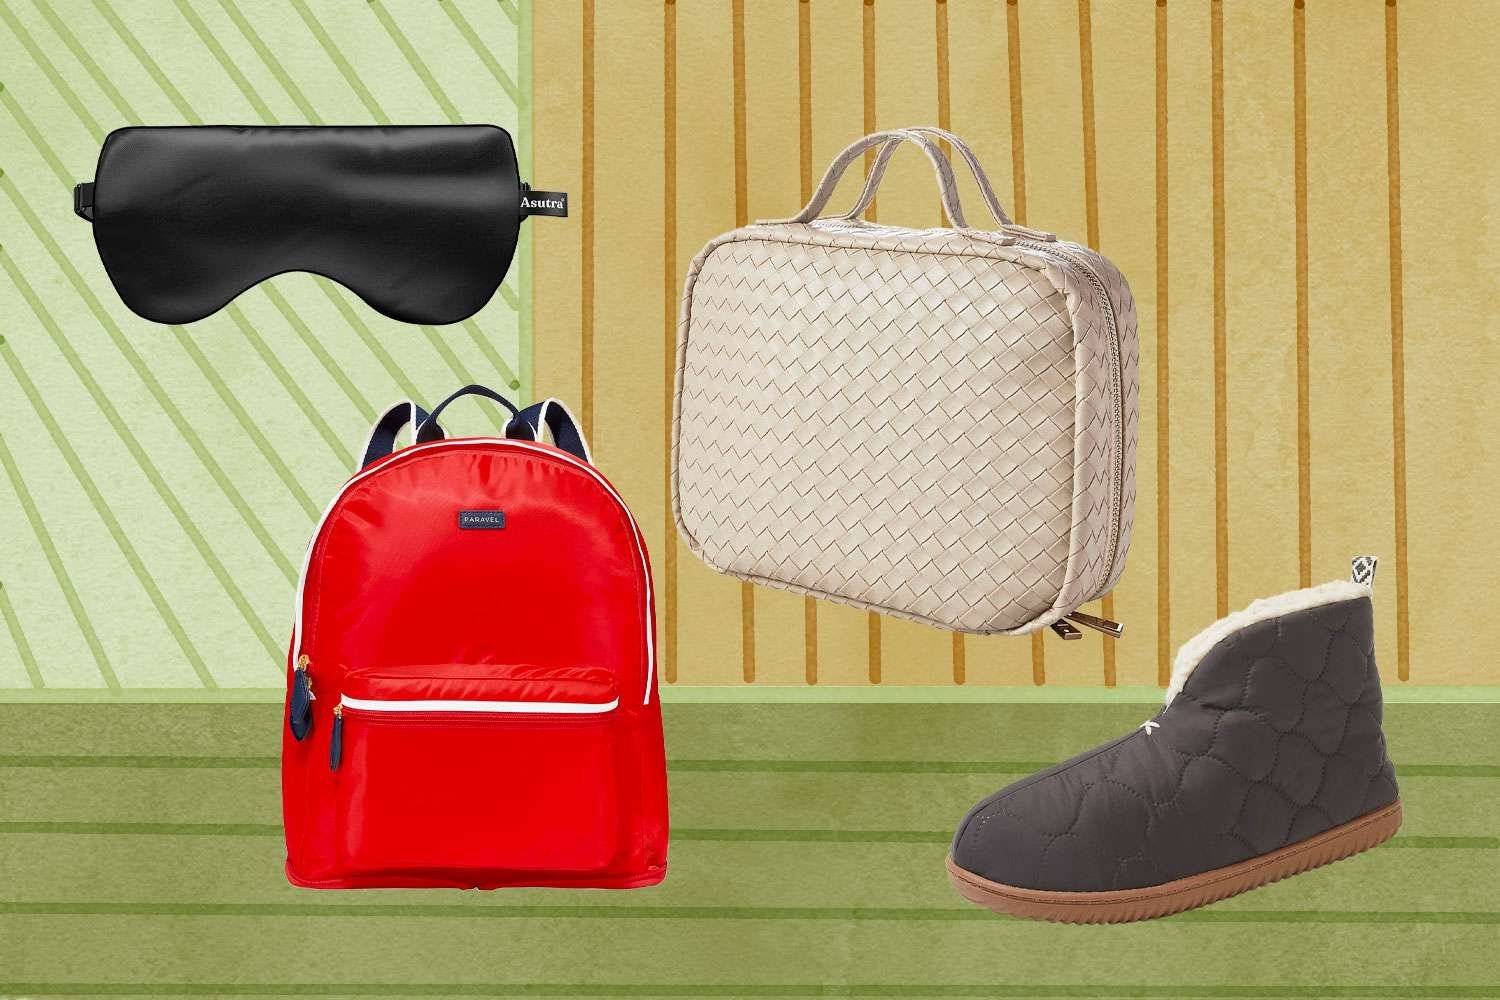 Gift Guides for Travelers: Travel Essentials, Gear, Gadgets, & More